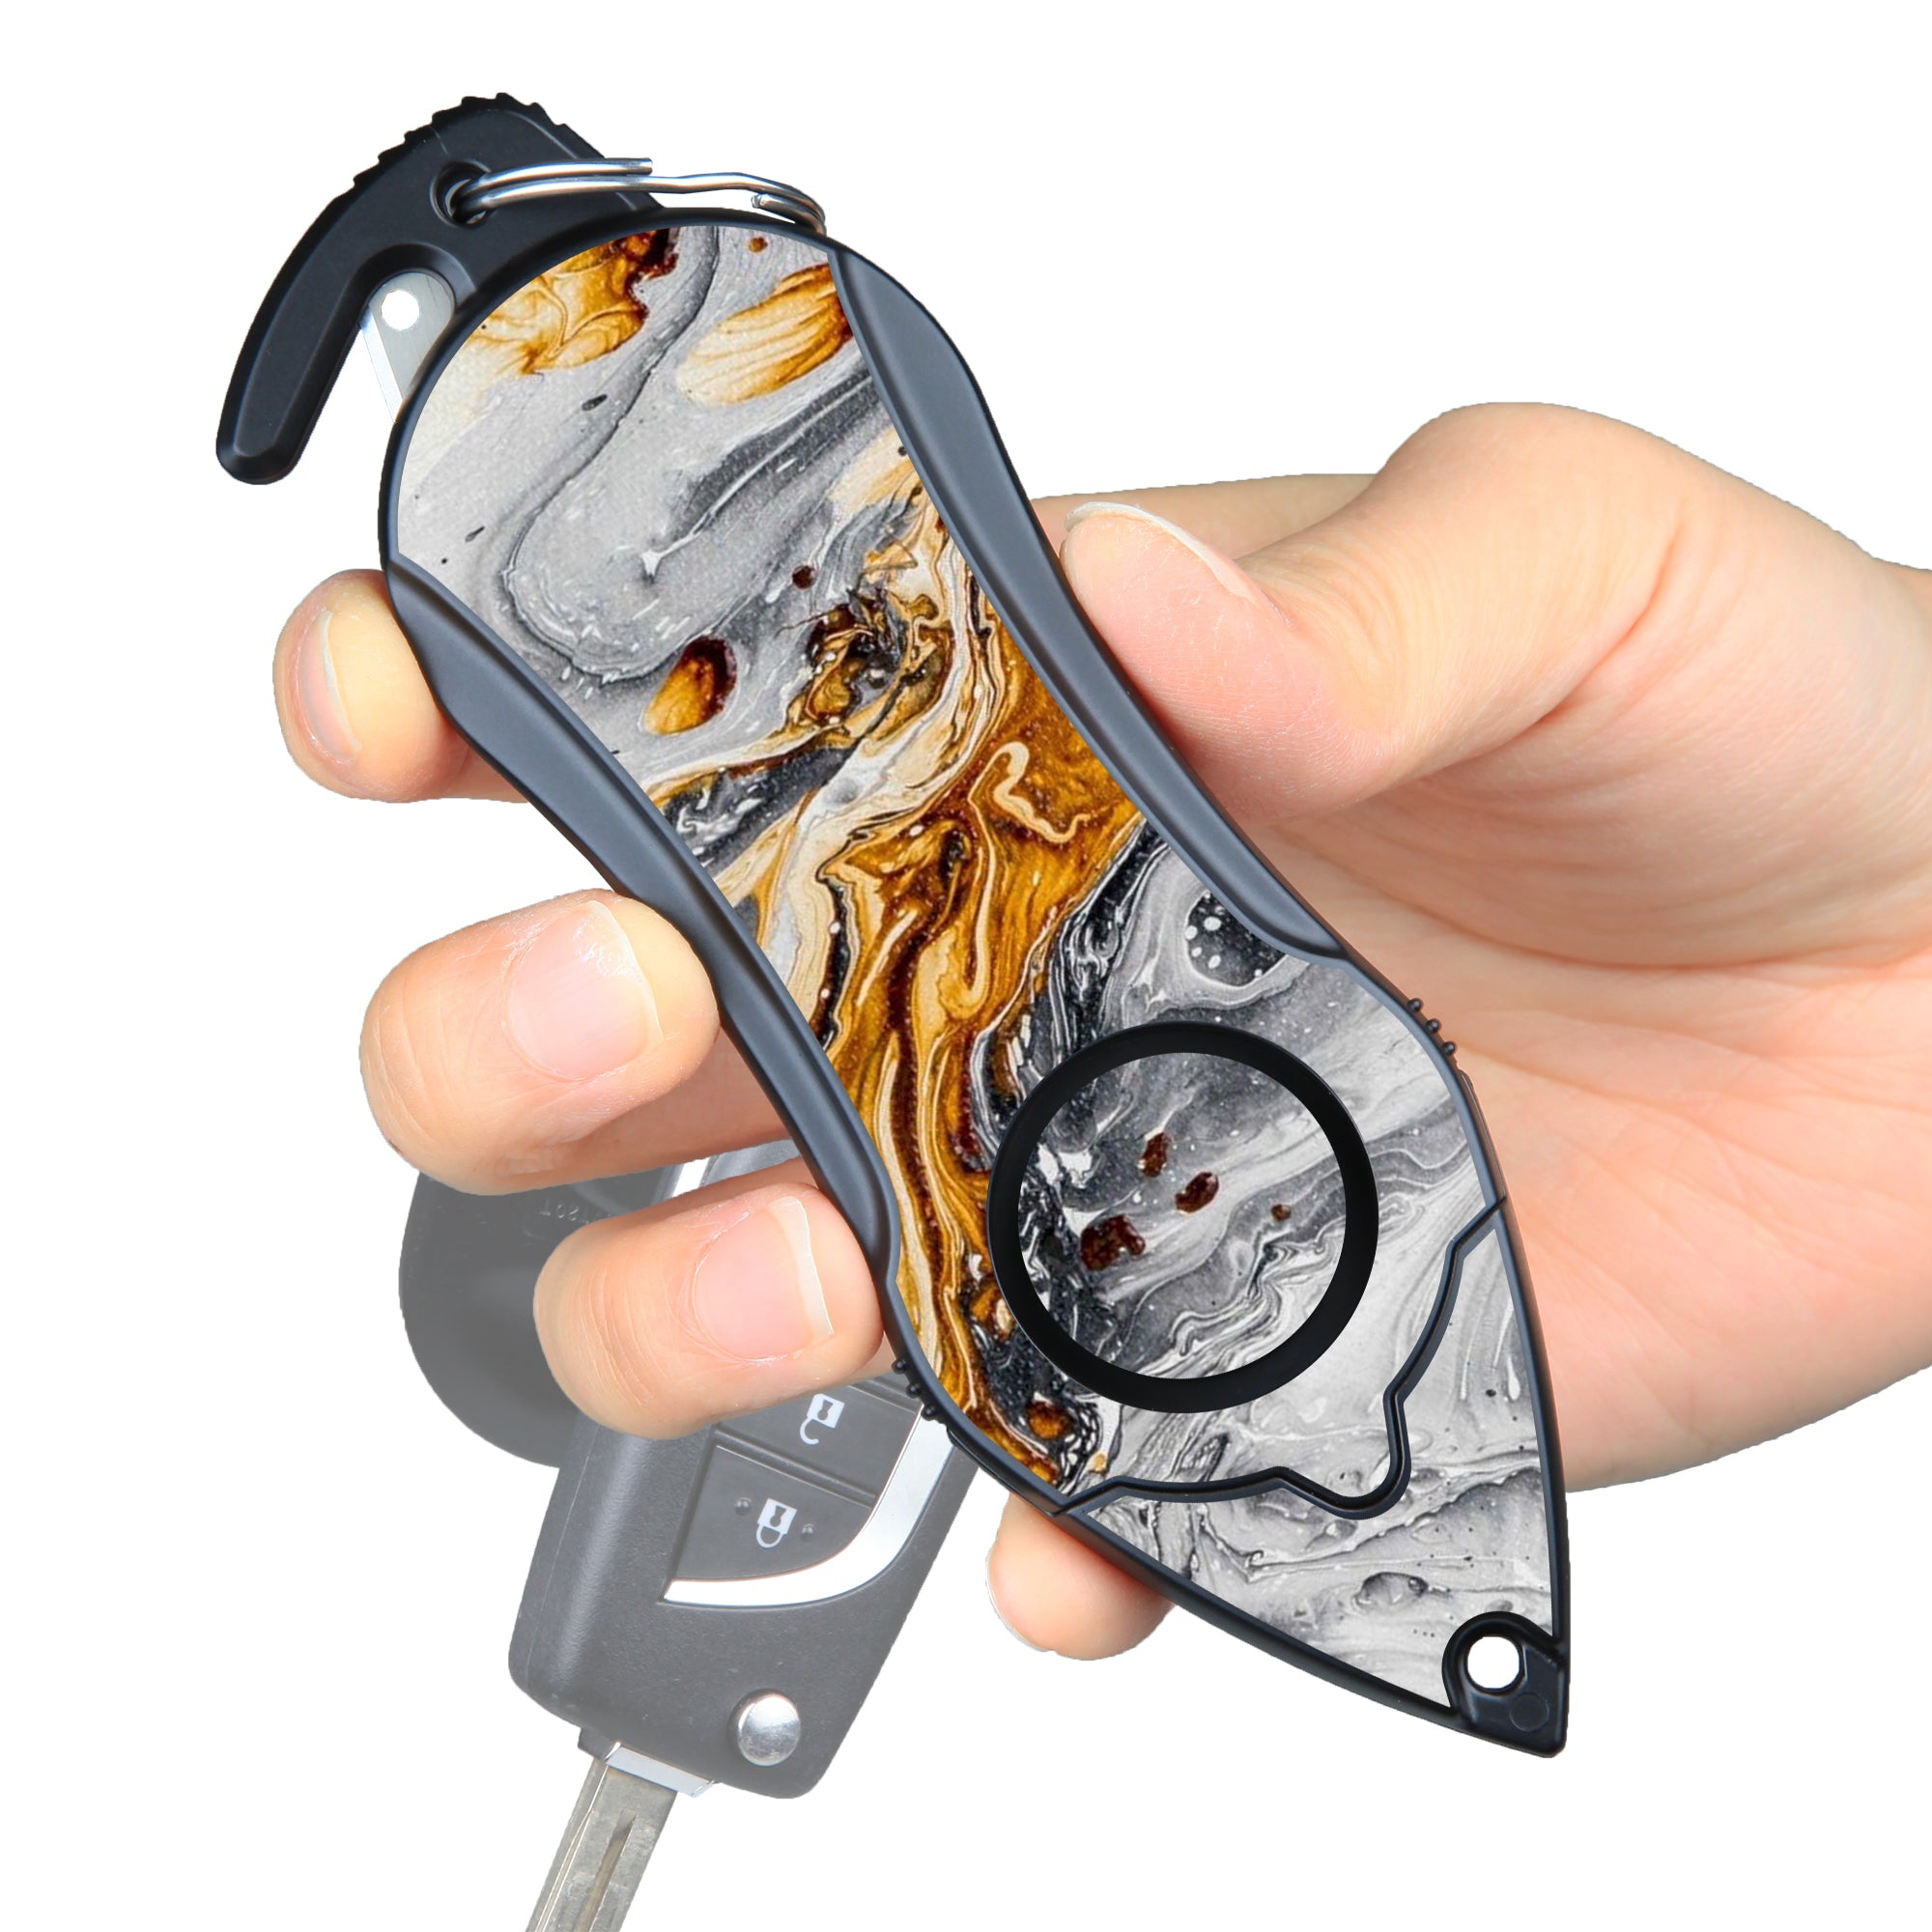 Personal Alarm Emergency Tool: Safety Alarm, Seat Belt Cutter